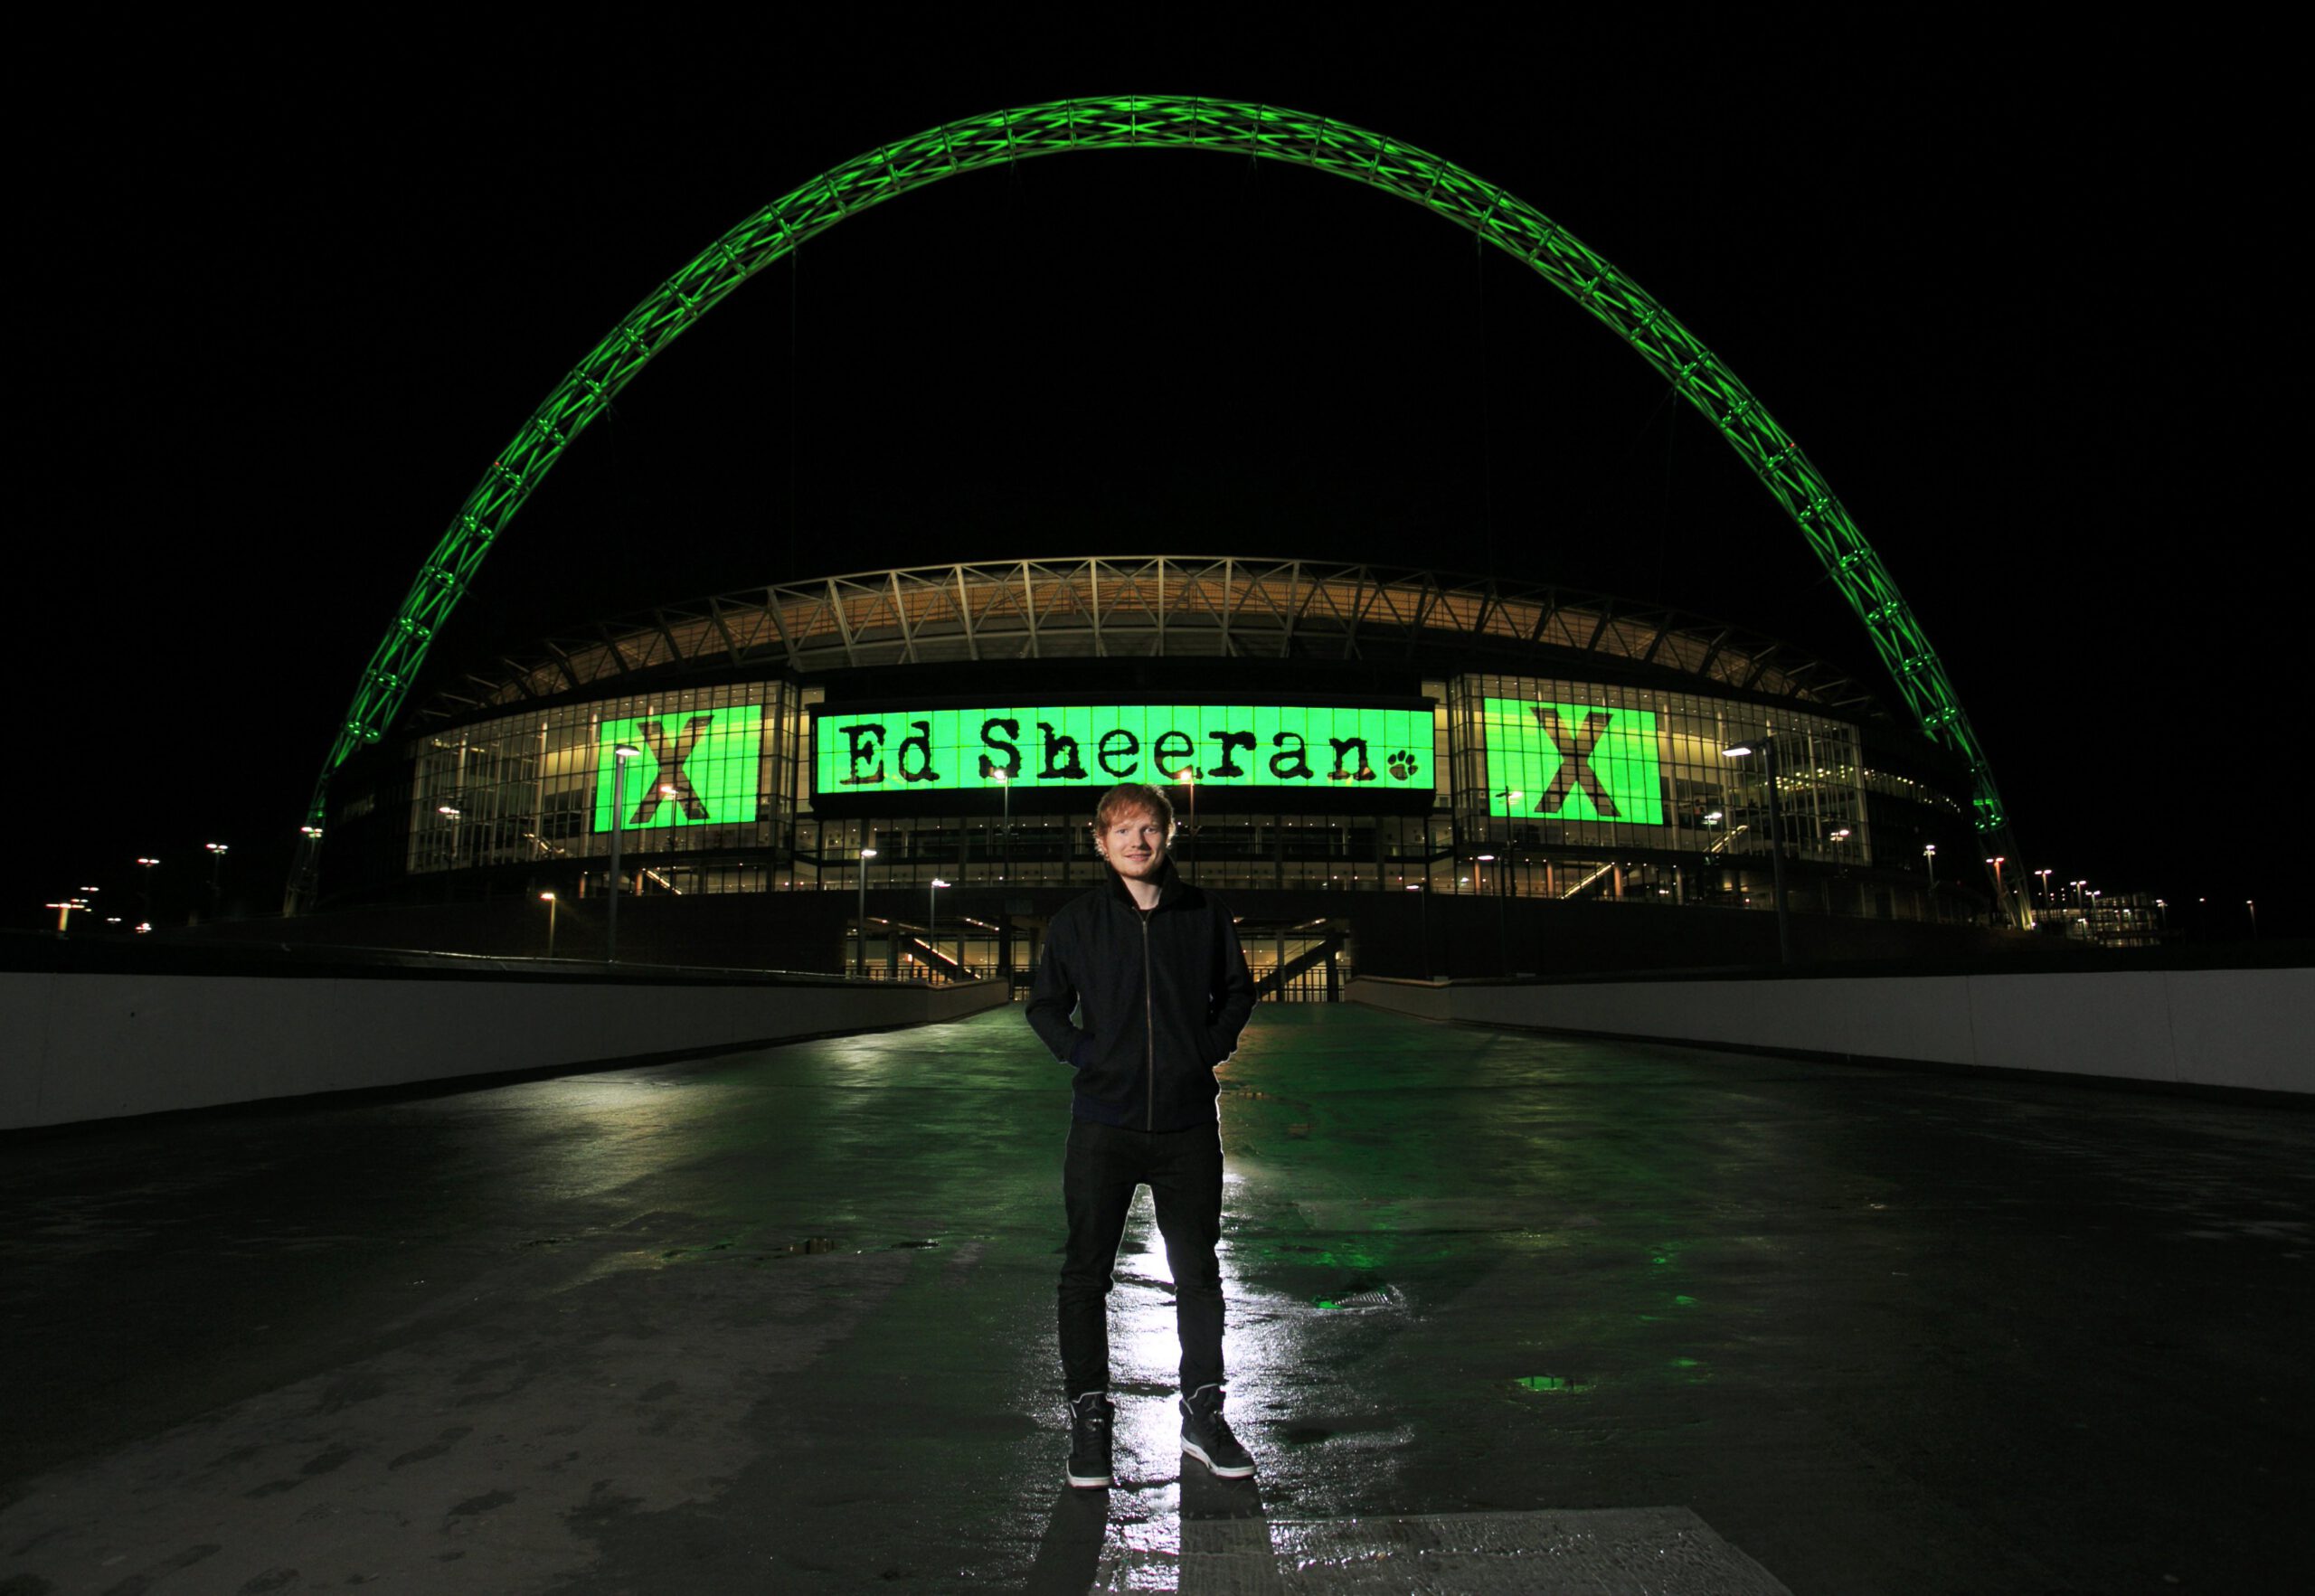 Ed Sheeran in front of Wembley Stadium, which is decked out with the letter X as that was the name of the album Sheeran was promoting when the photo was taken in 2014